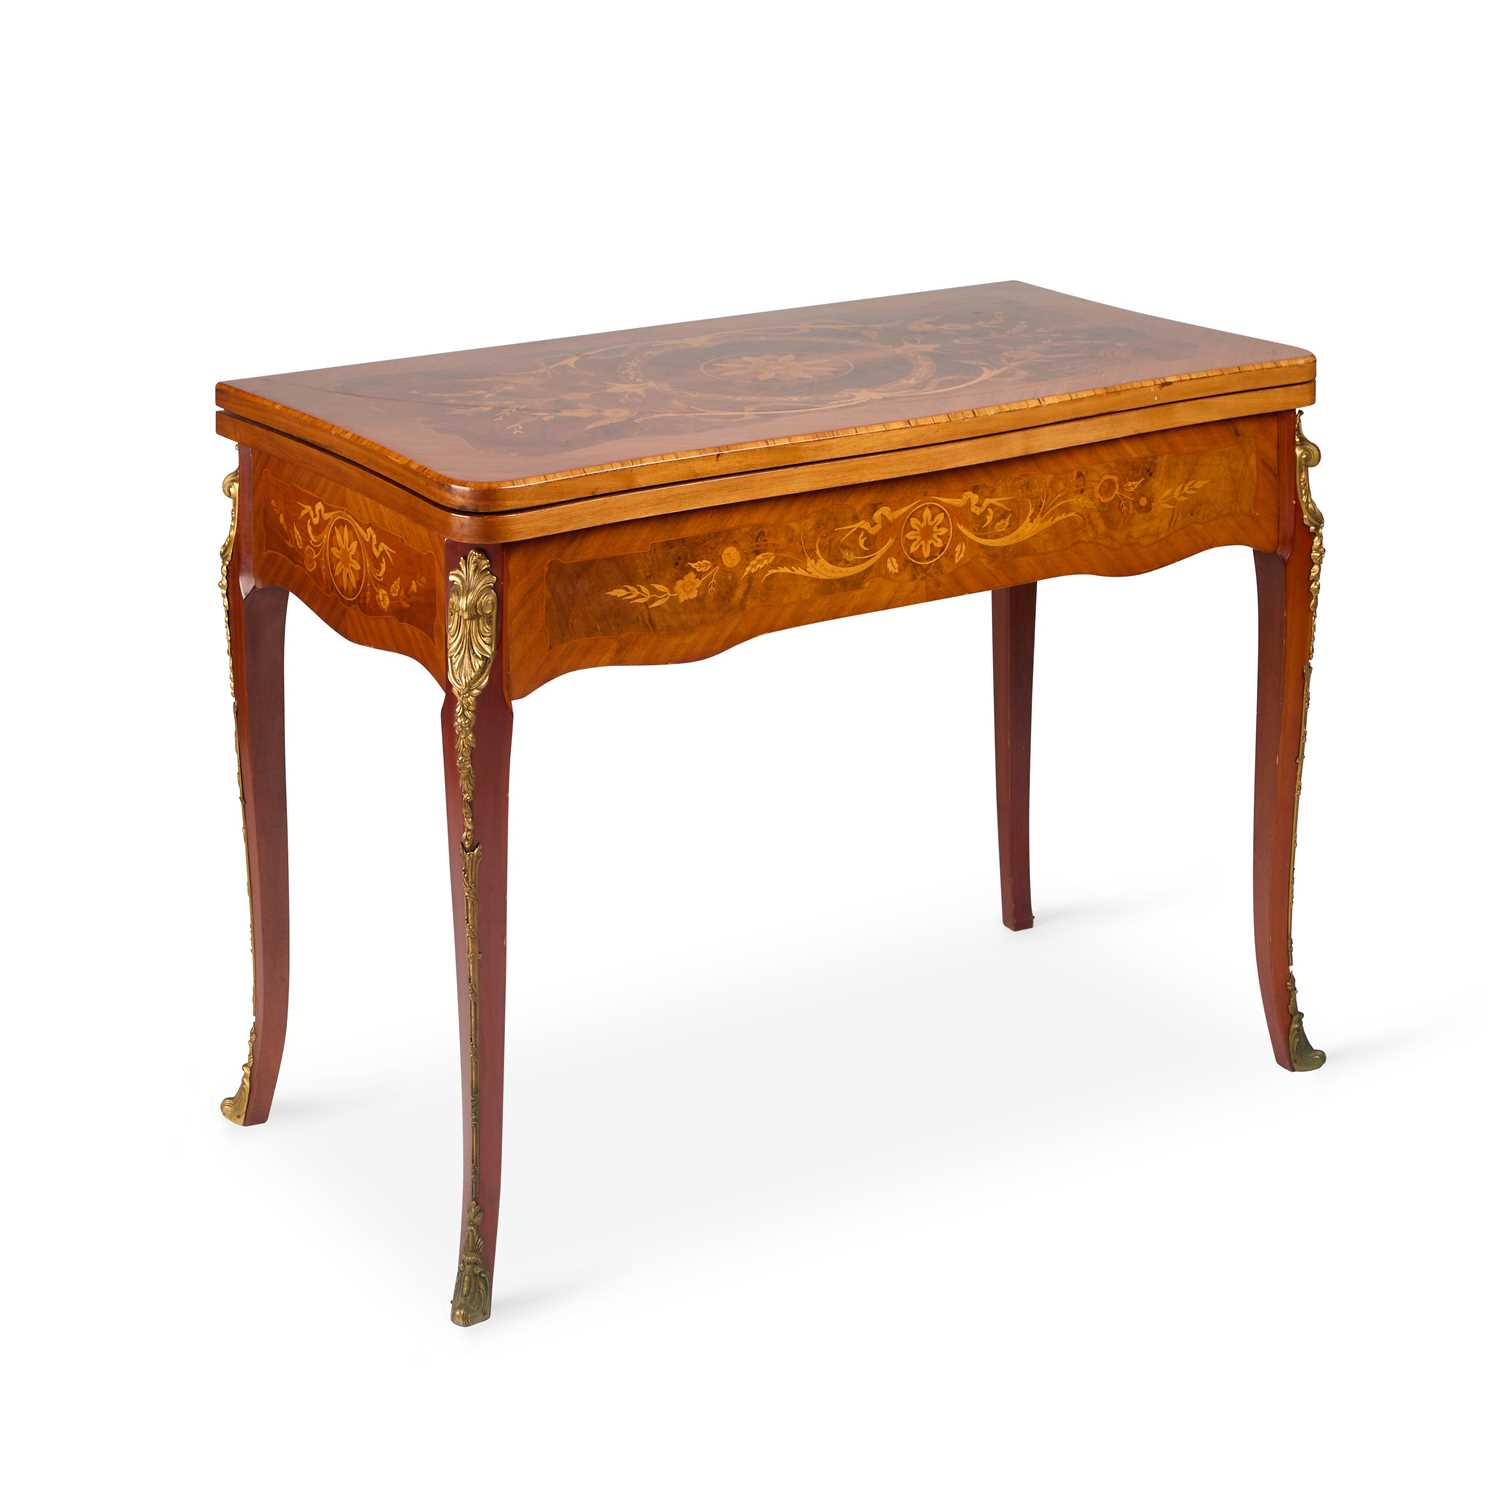 A CONTINENTAL FLORAL MARQUETRY FOLDOVER GAMES TABLE